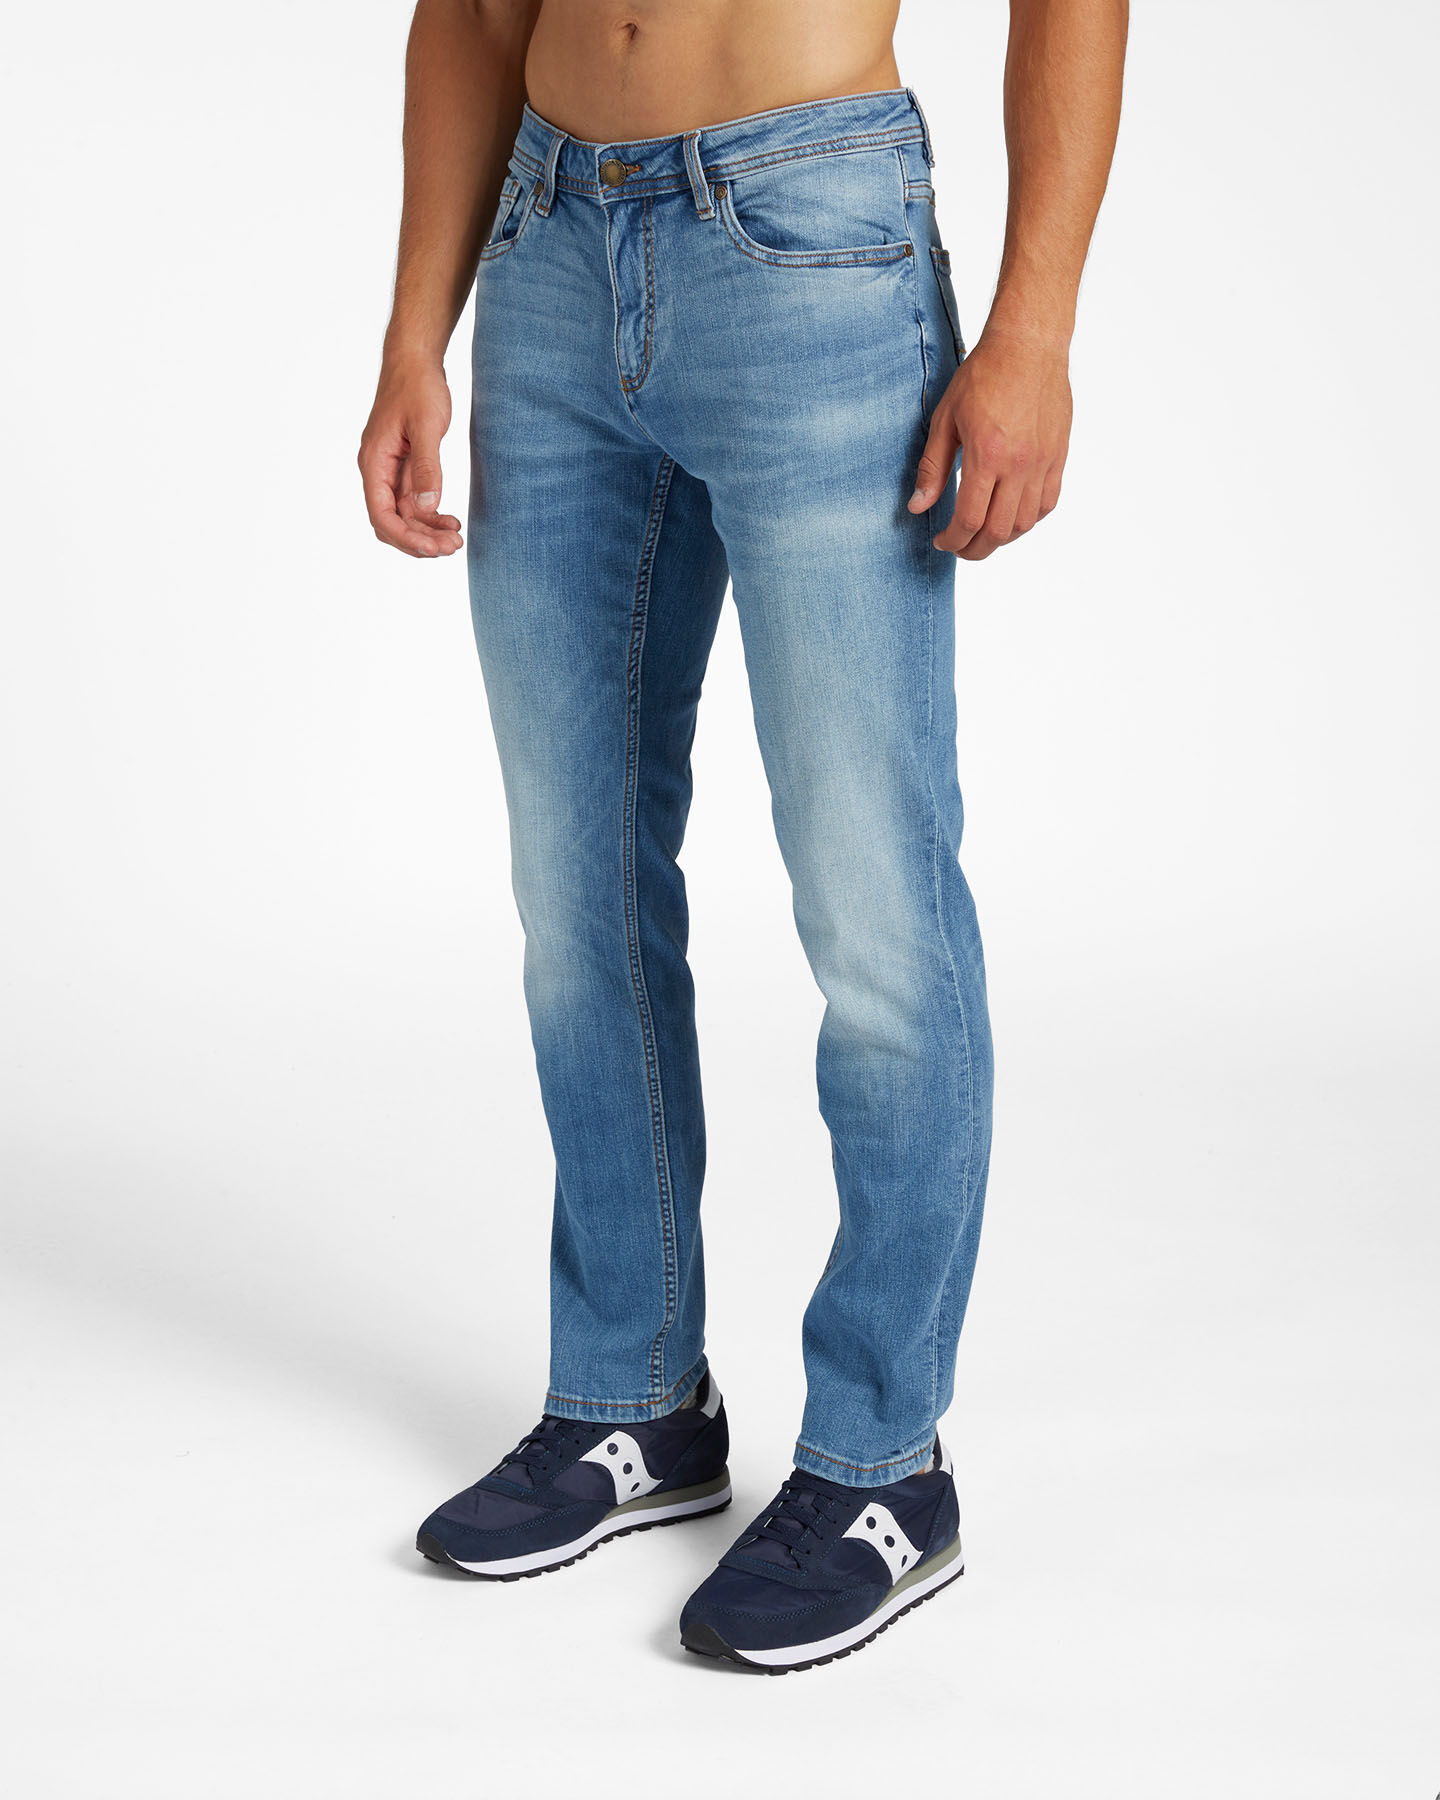  Jeans DACK'S CASUAL CITY M S4106779|MD|44 scatto 2